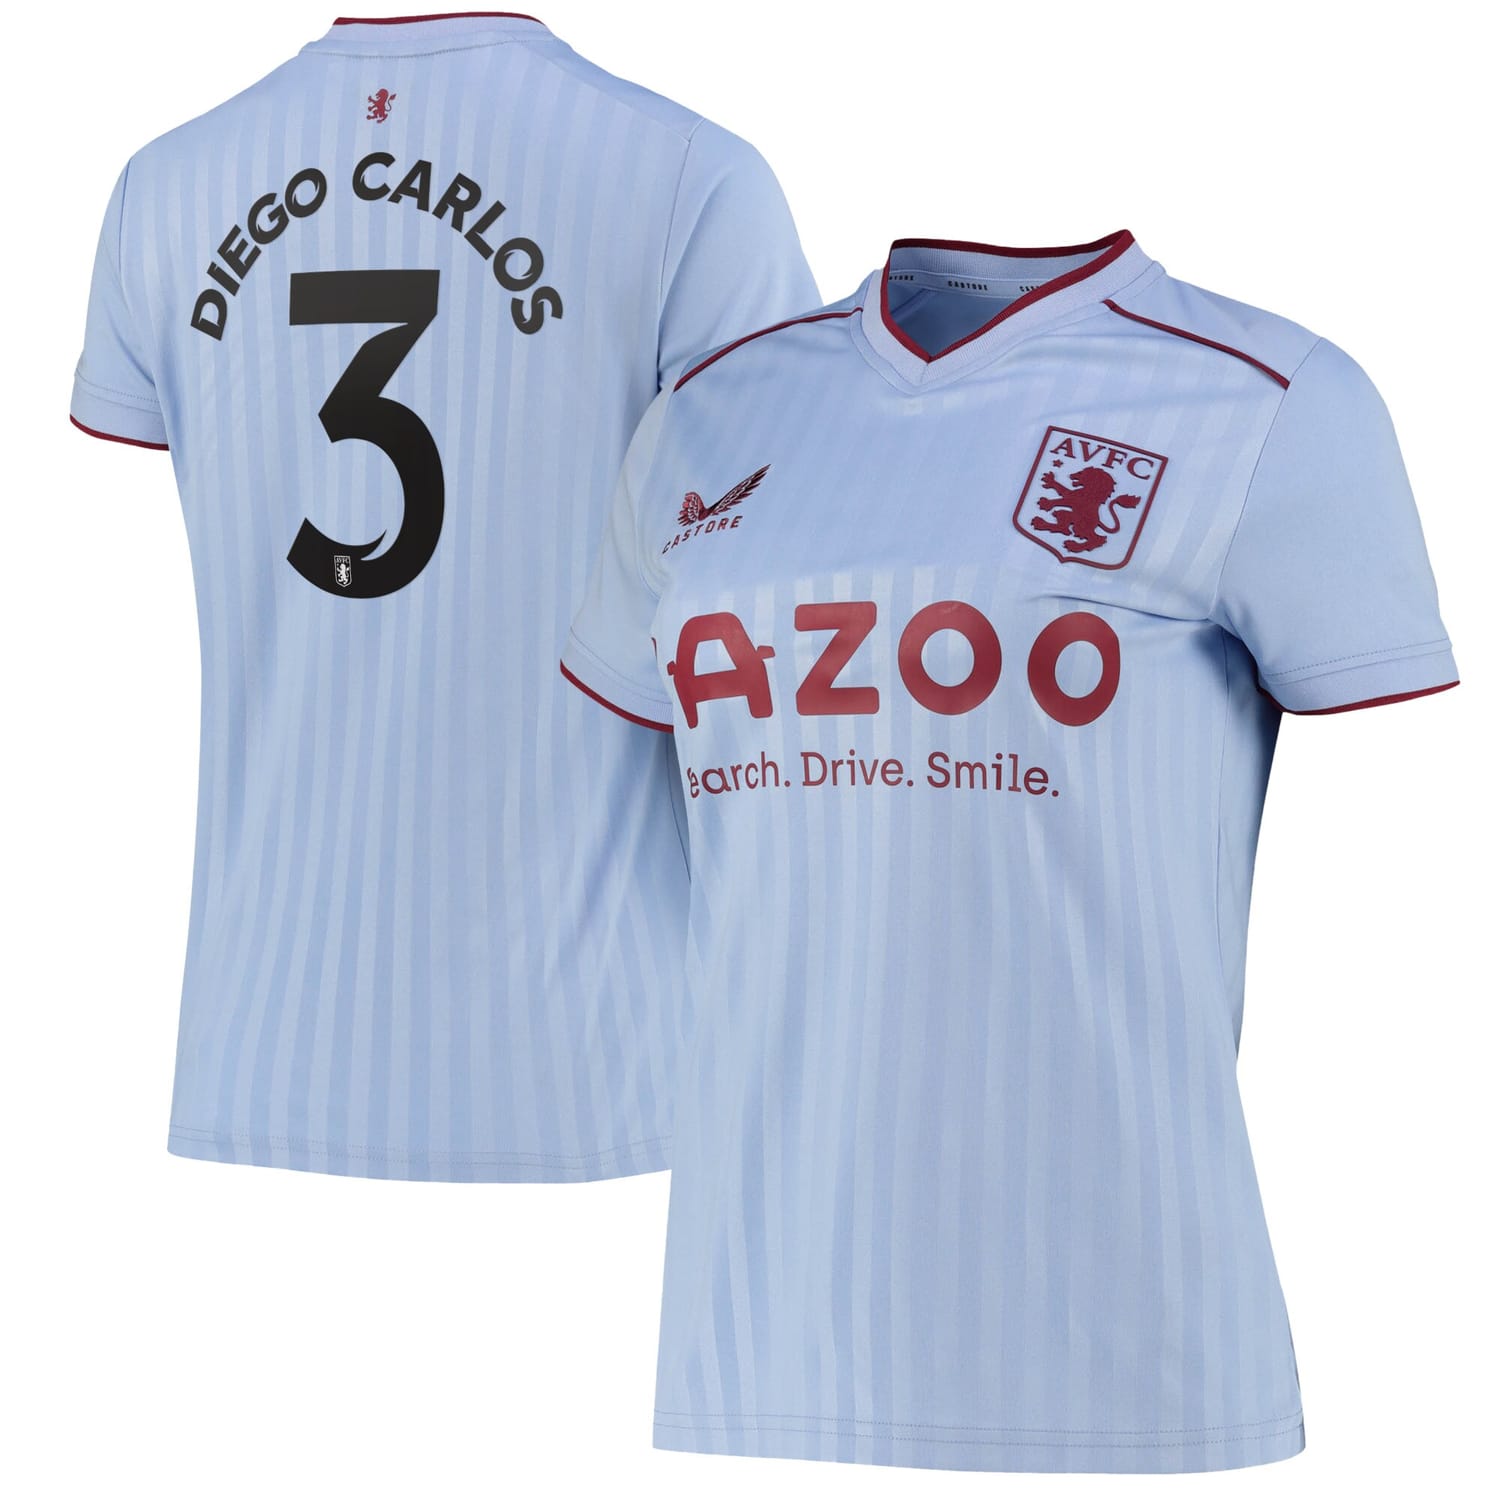 Premier League Aston Villa Away Cup Jersey Shirt 2022-23 player Diego Carlos 3 printing for Women